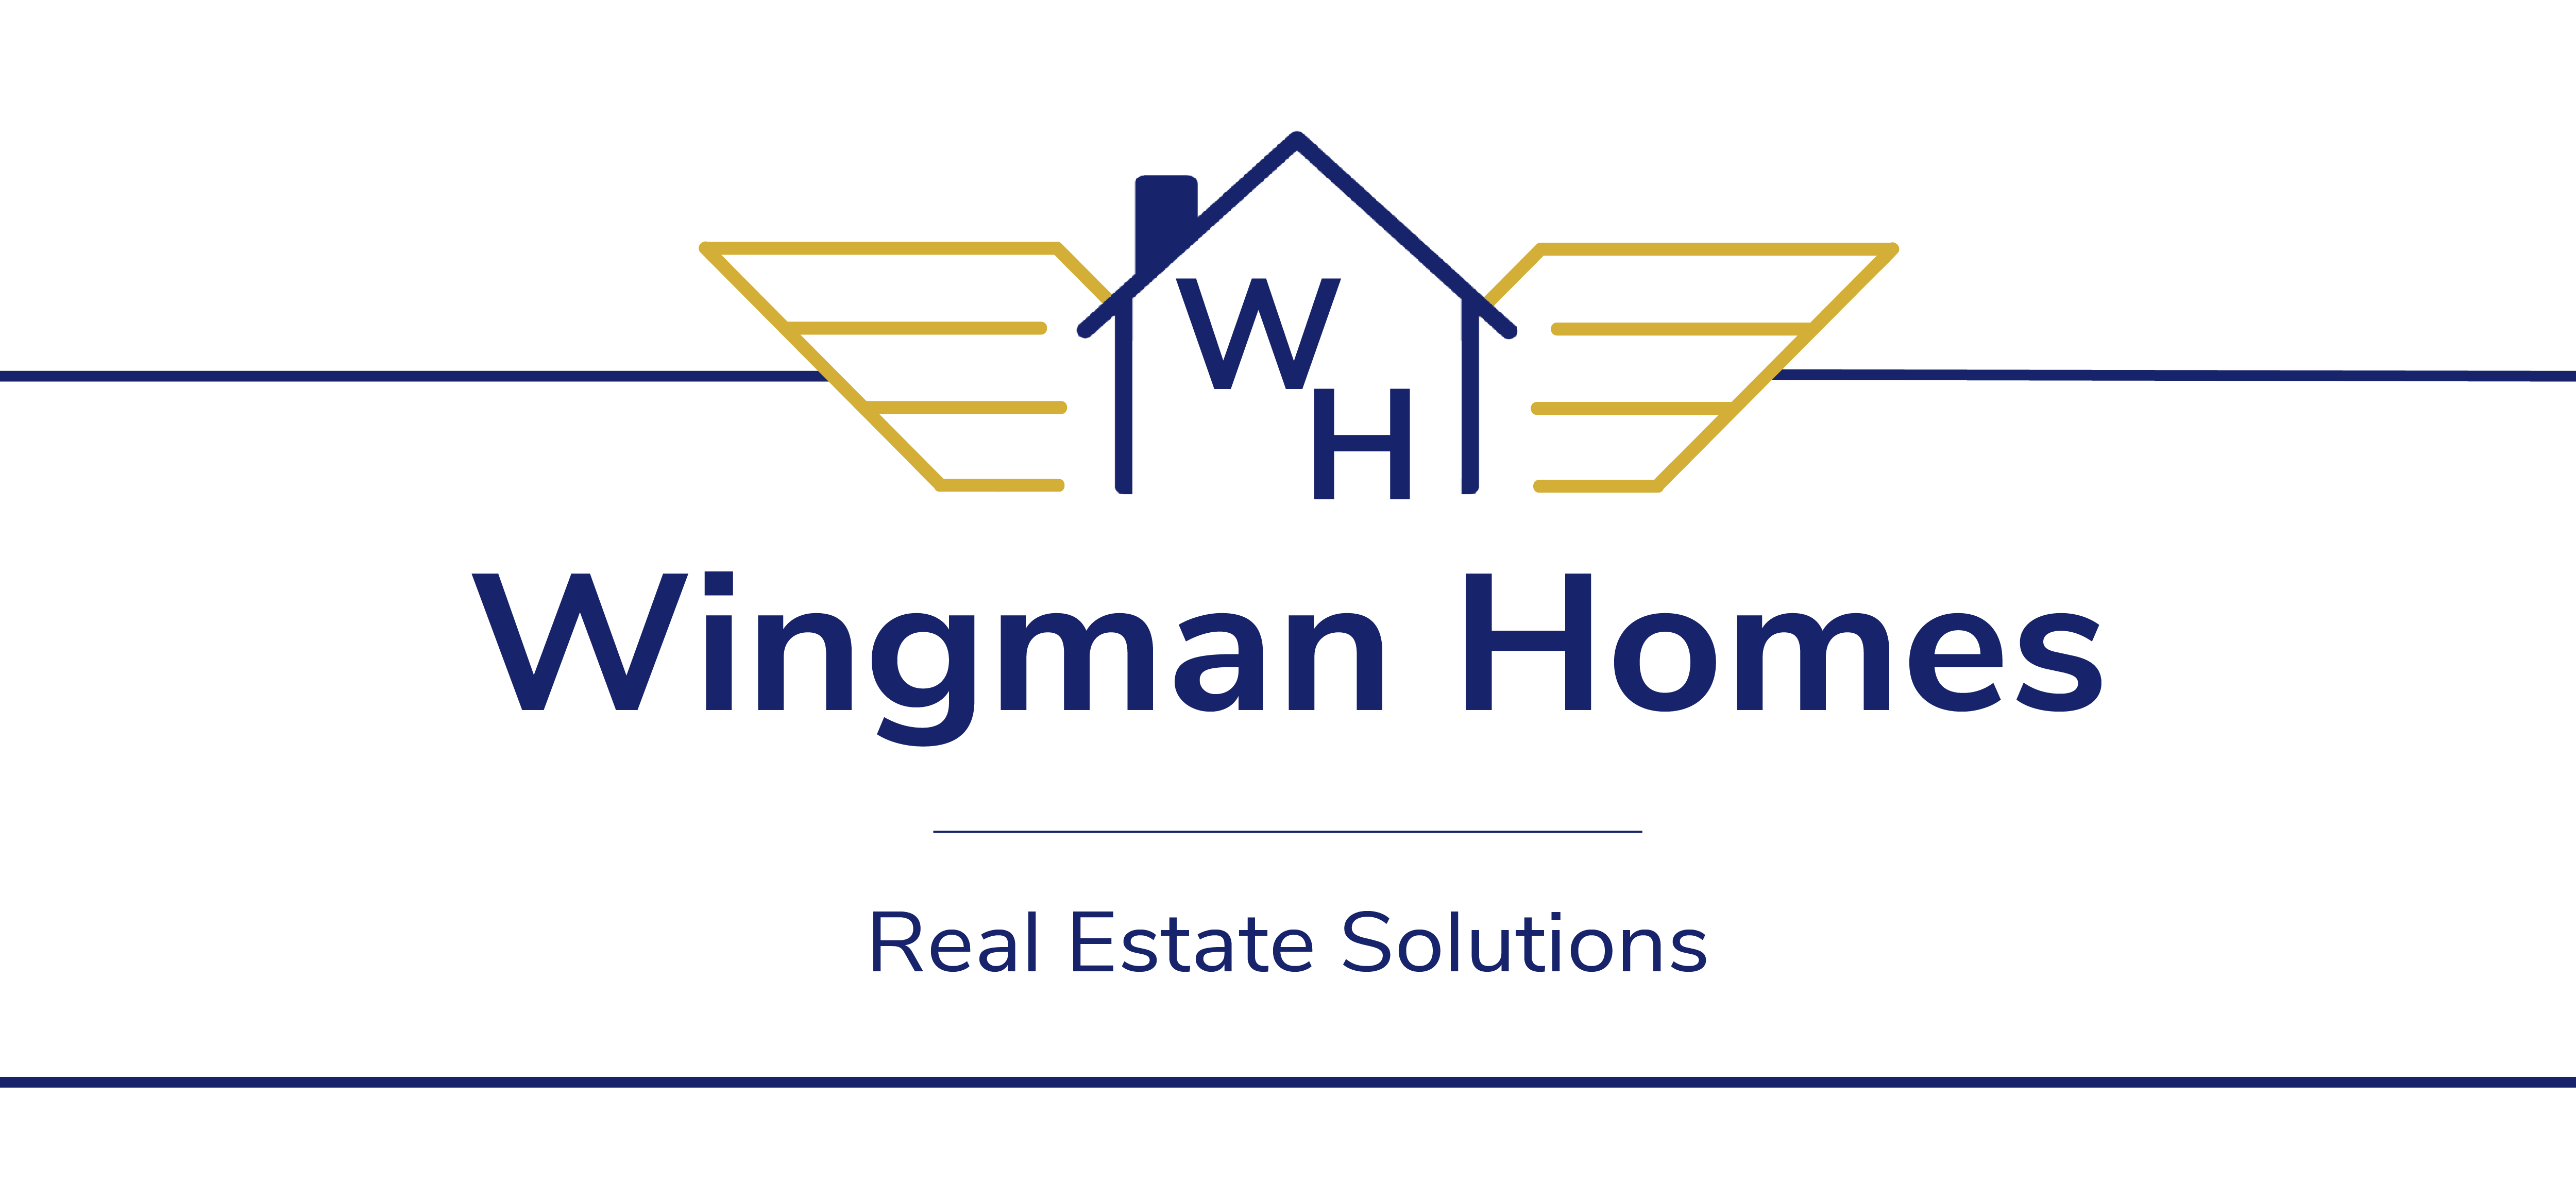 Wingman Homes Real Estate Solutions